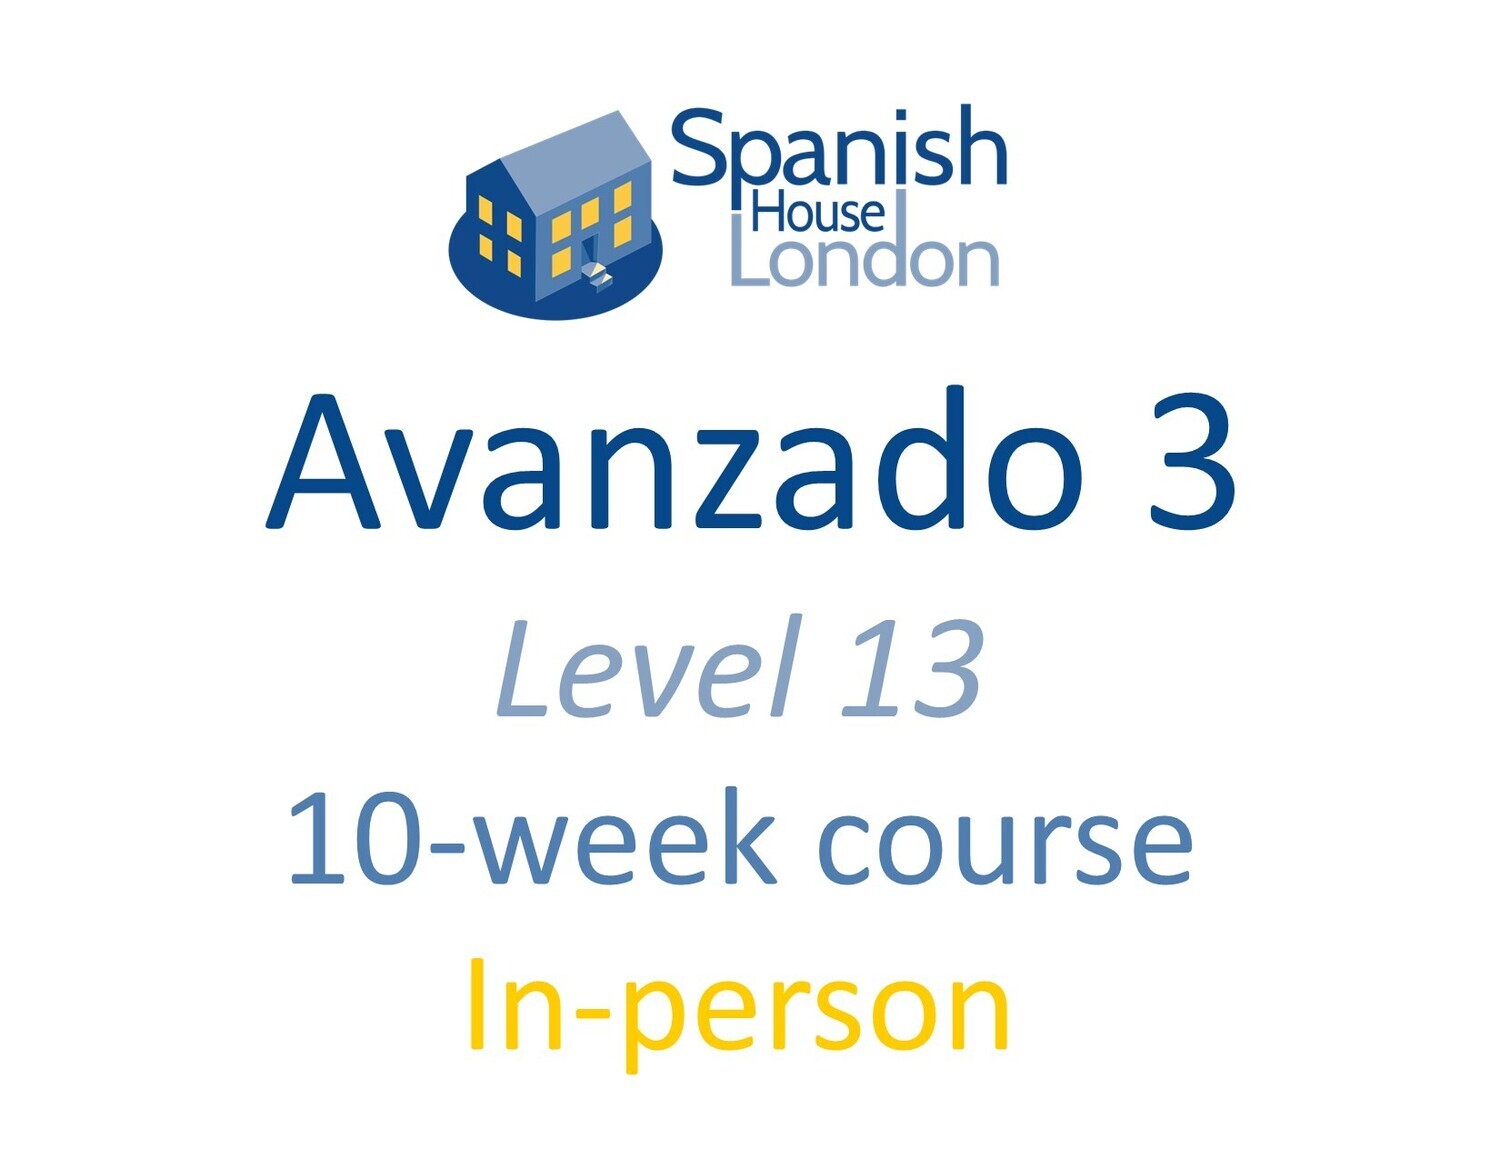 Avanzado 3 Course starting on 31st July at 6pm in Euston